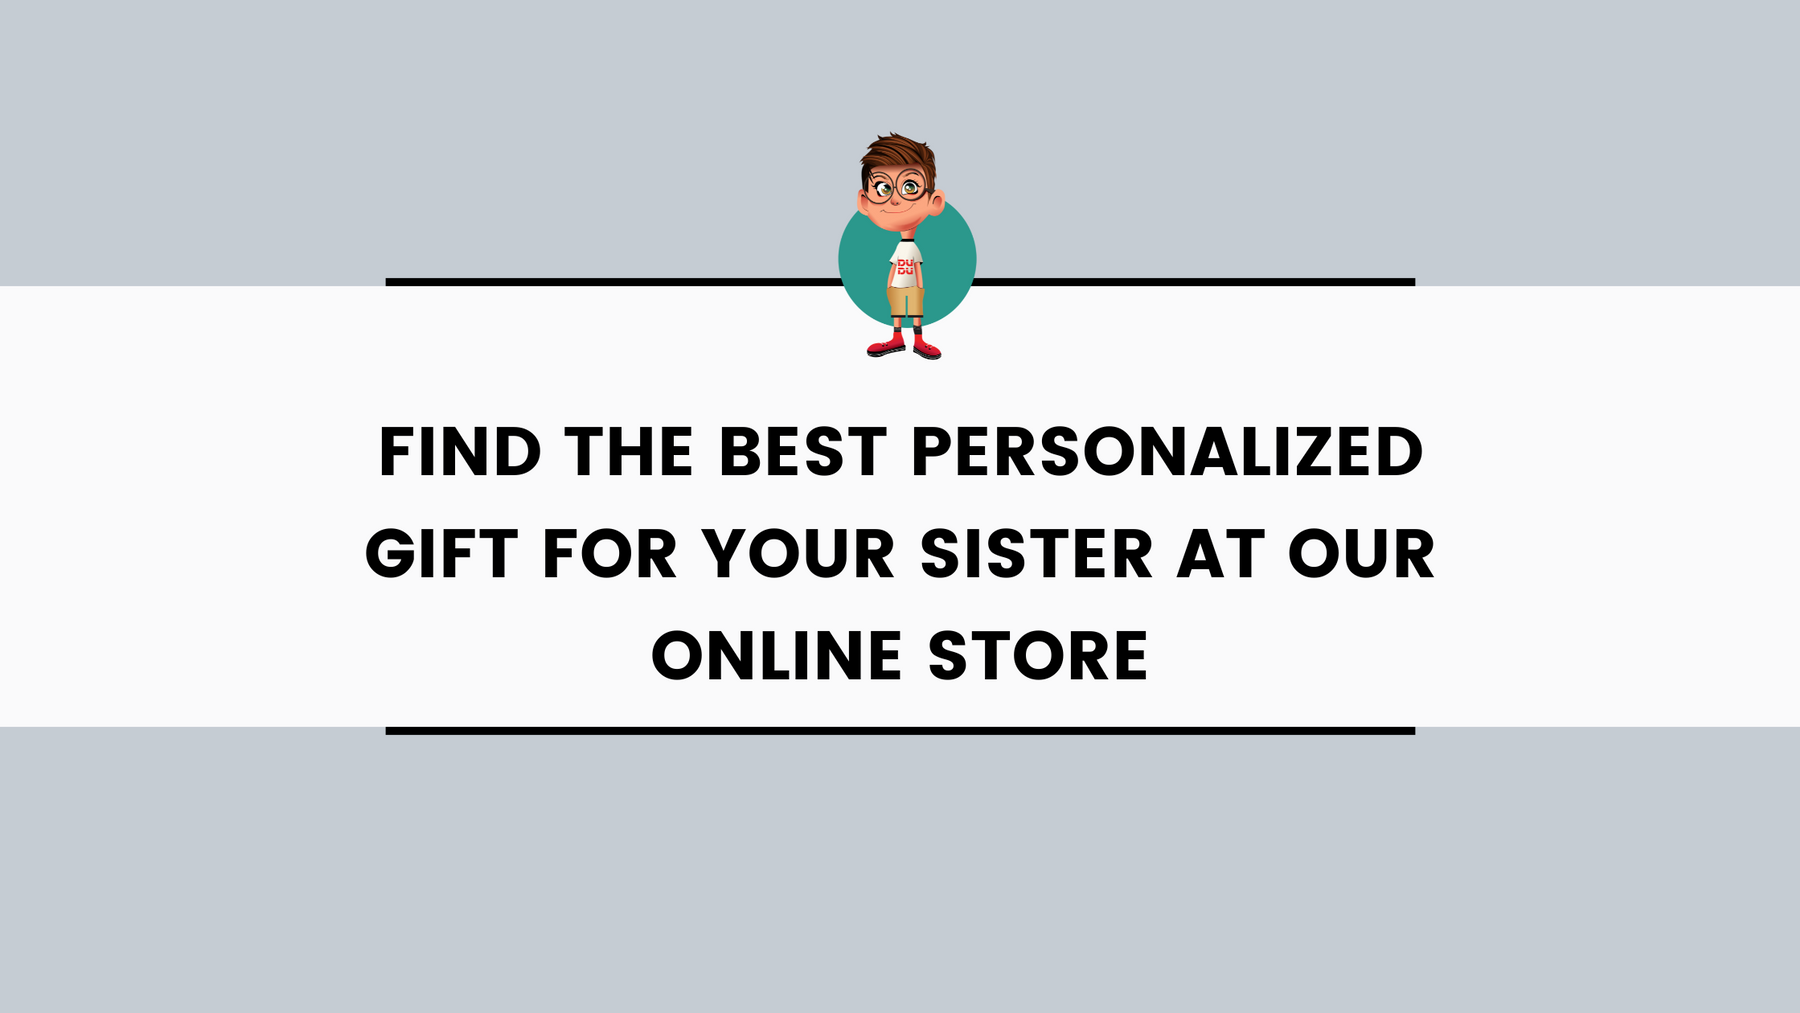 Find the Best Personalized Gift for Your Sister at Our Online Store